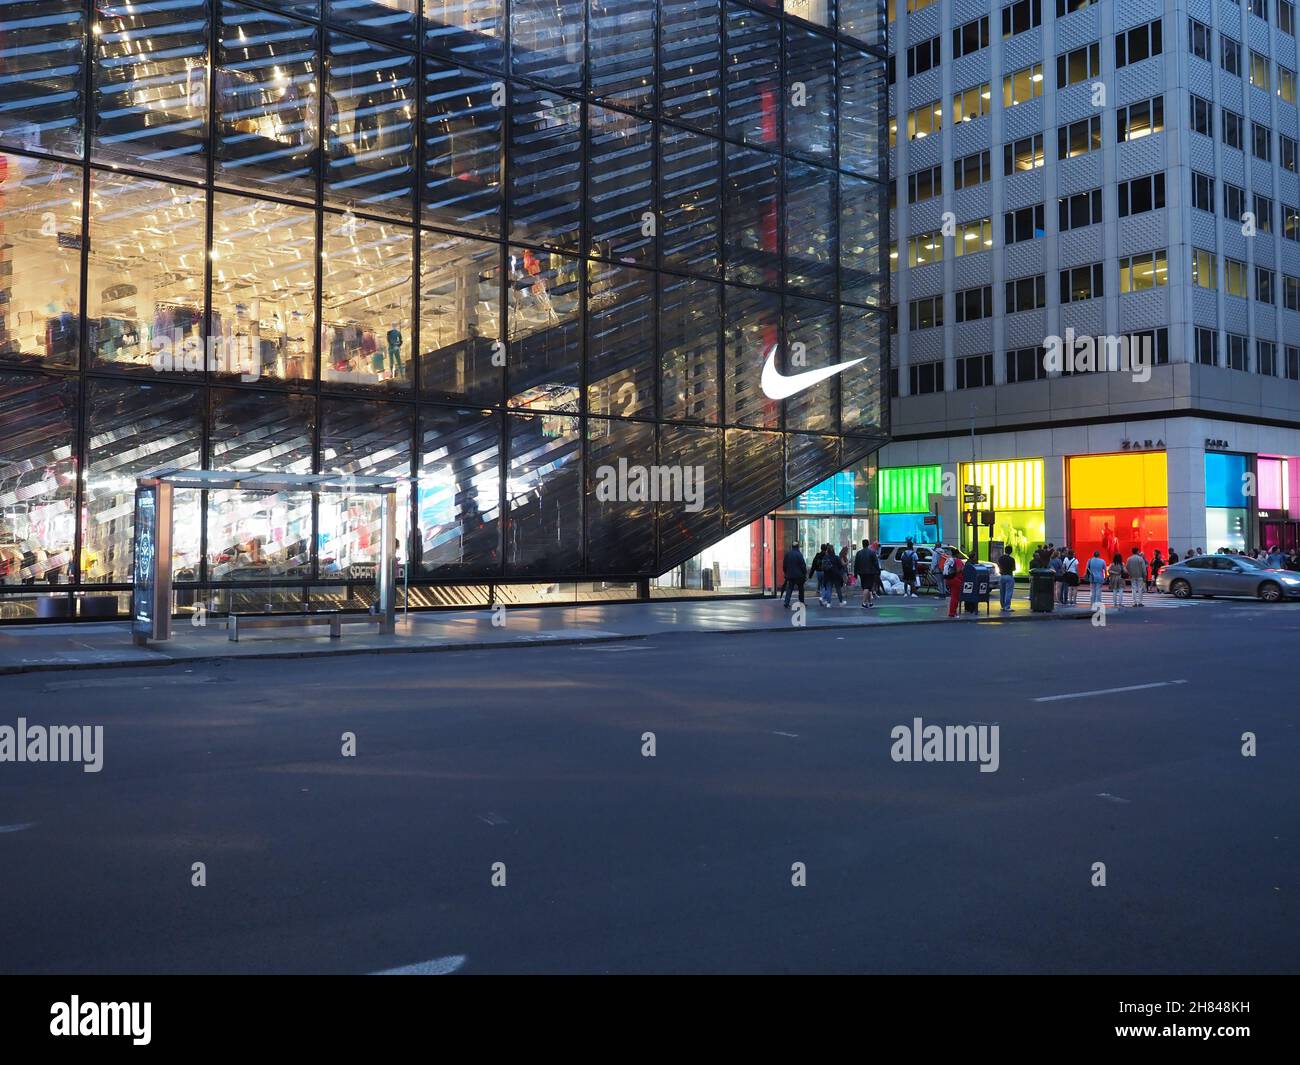 Machu Picchu promoción calor Image of the Nike store located on 5th Avenue Stock Photo - Alamy